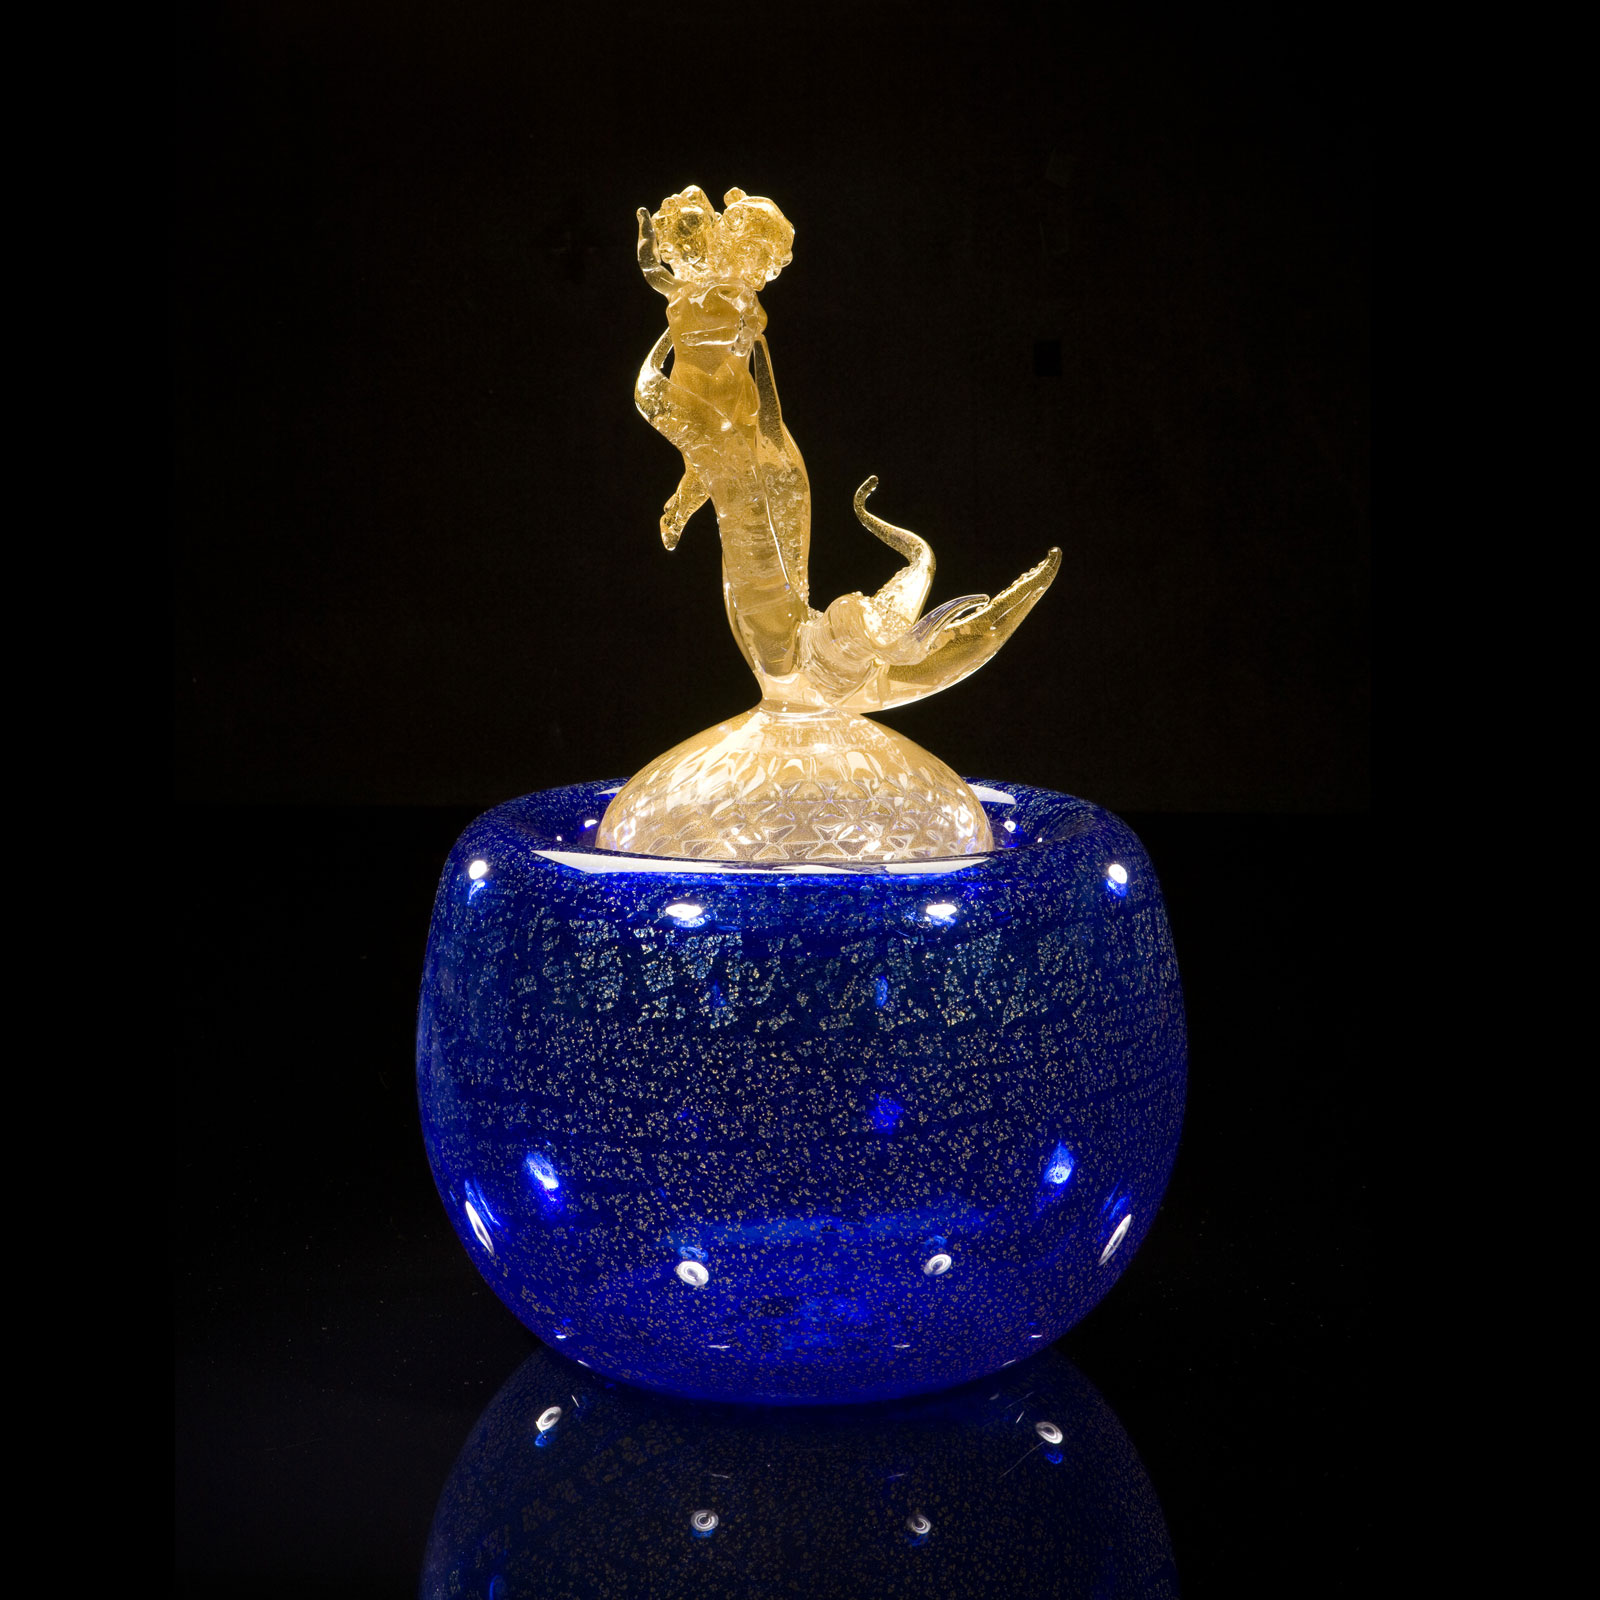 Dale Chihuly, Putti Entwined with Sea Star on Imperial Blue Vessel, 1999